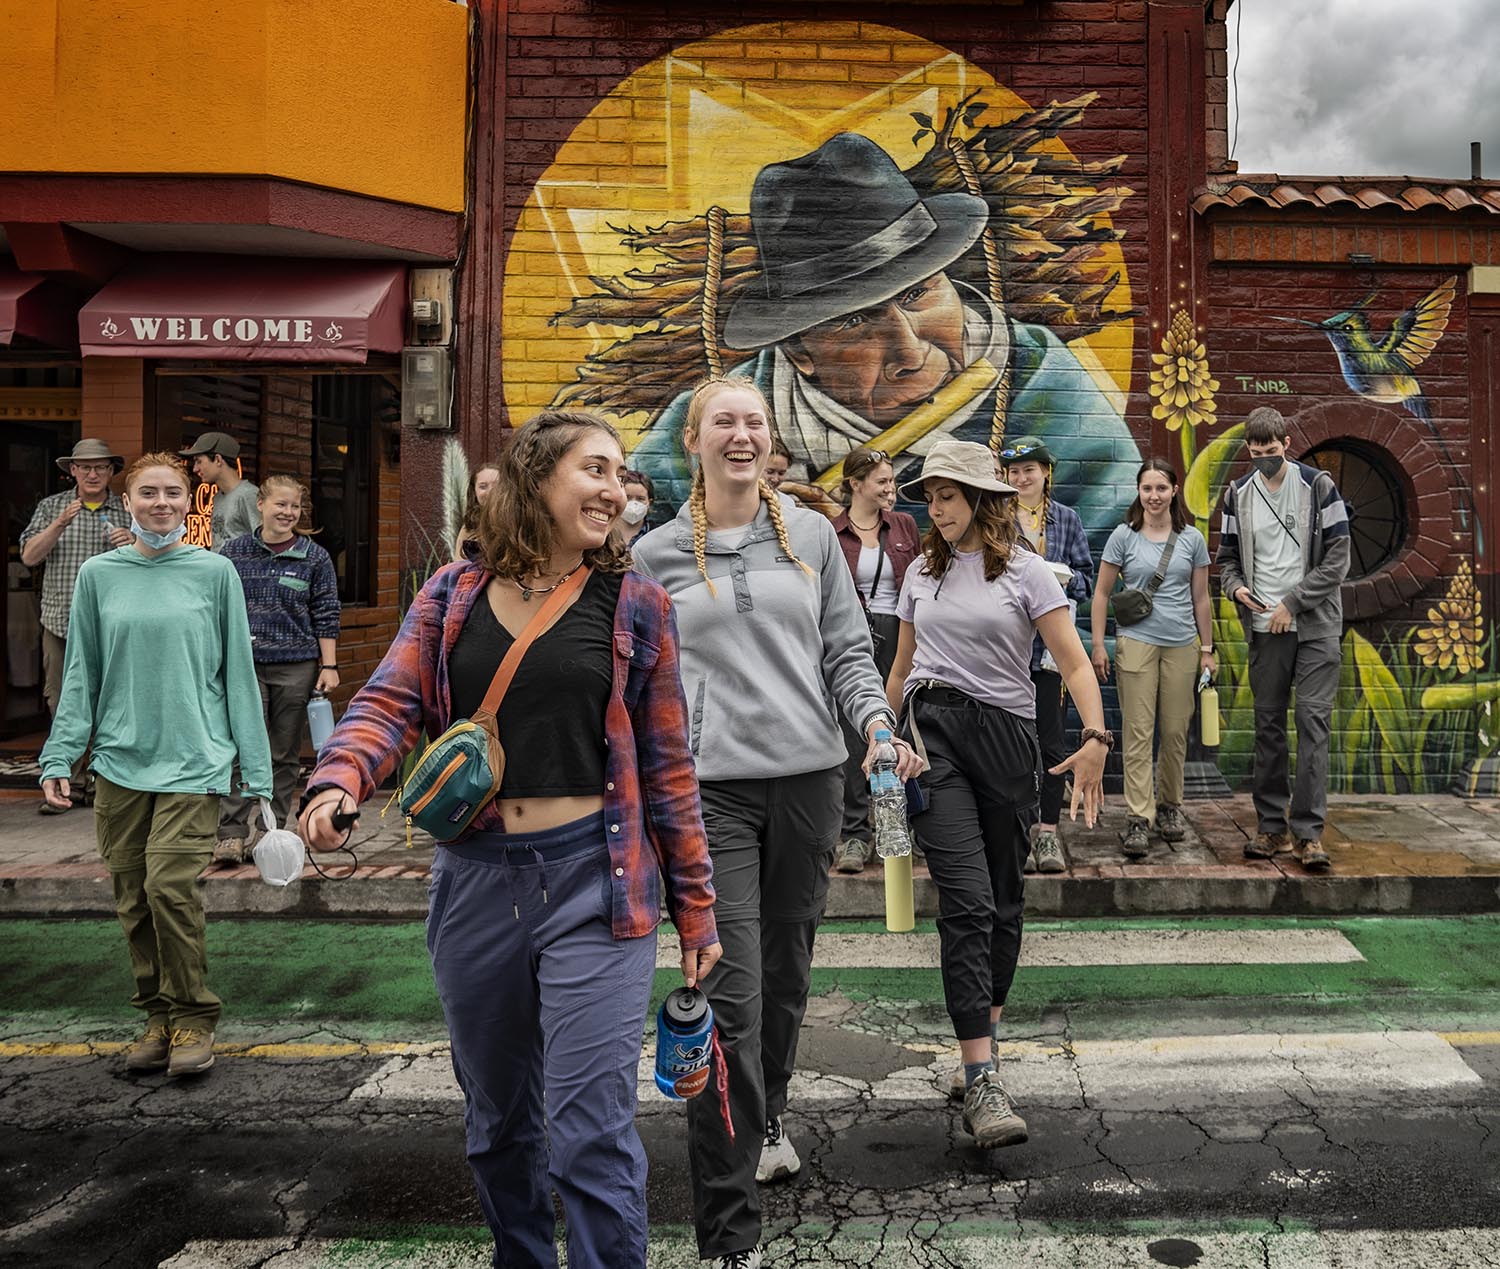 A group of Western students crossing the road, with a colorful mural of a flute player behind them